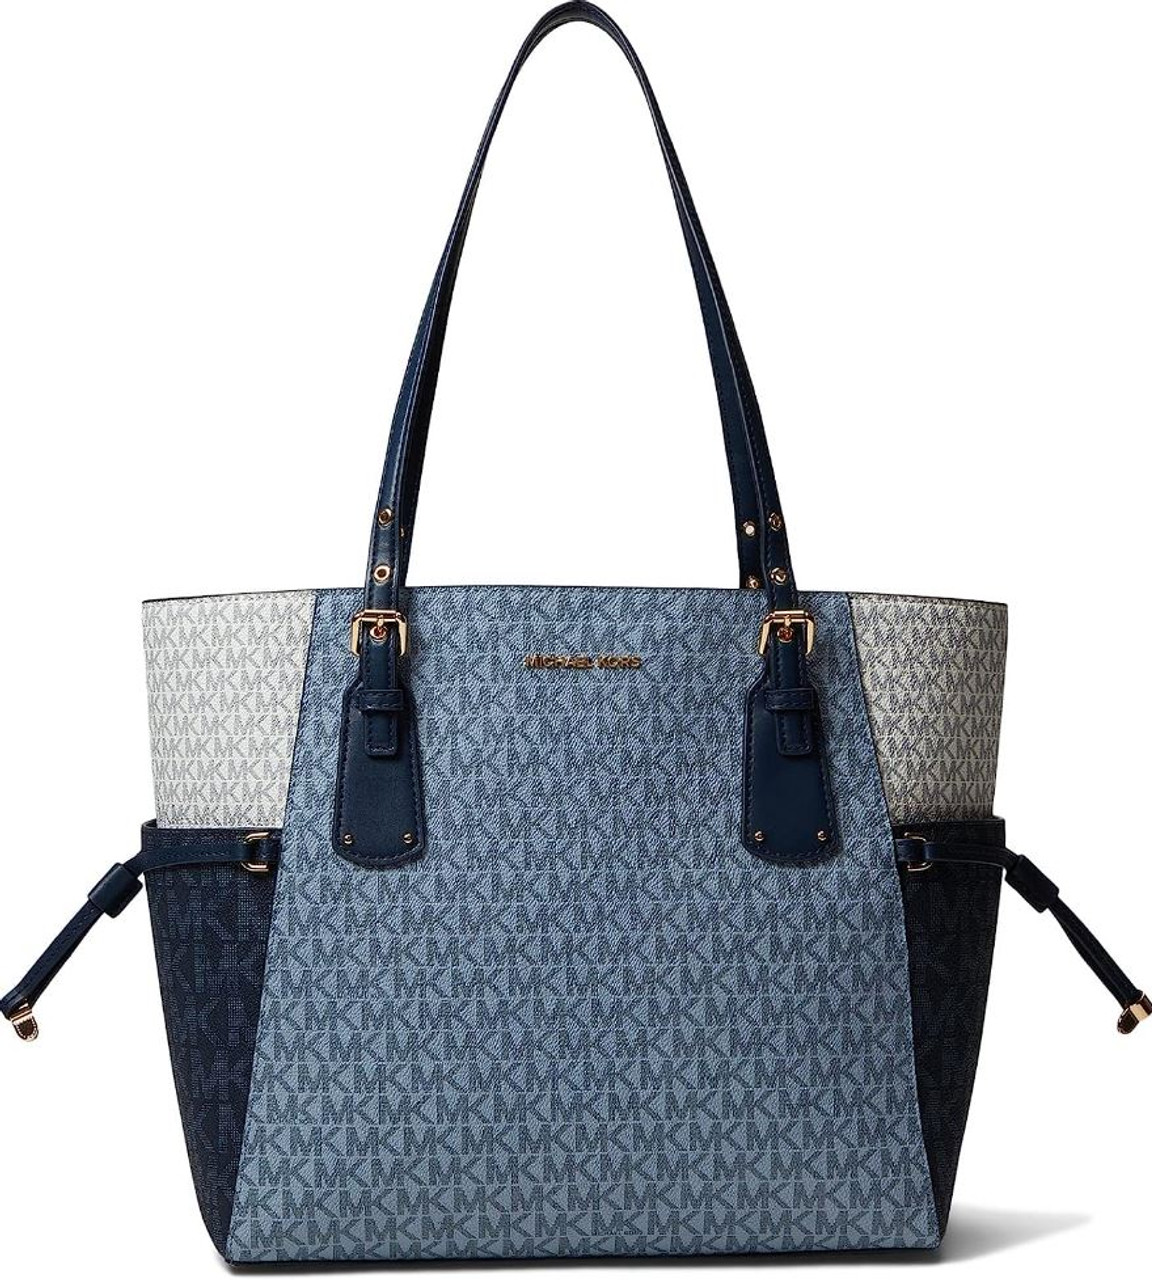 Michael Kors Voyager East/West Tote Navy/White/Pale Blue One Size